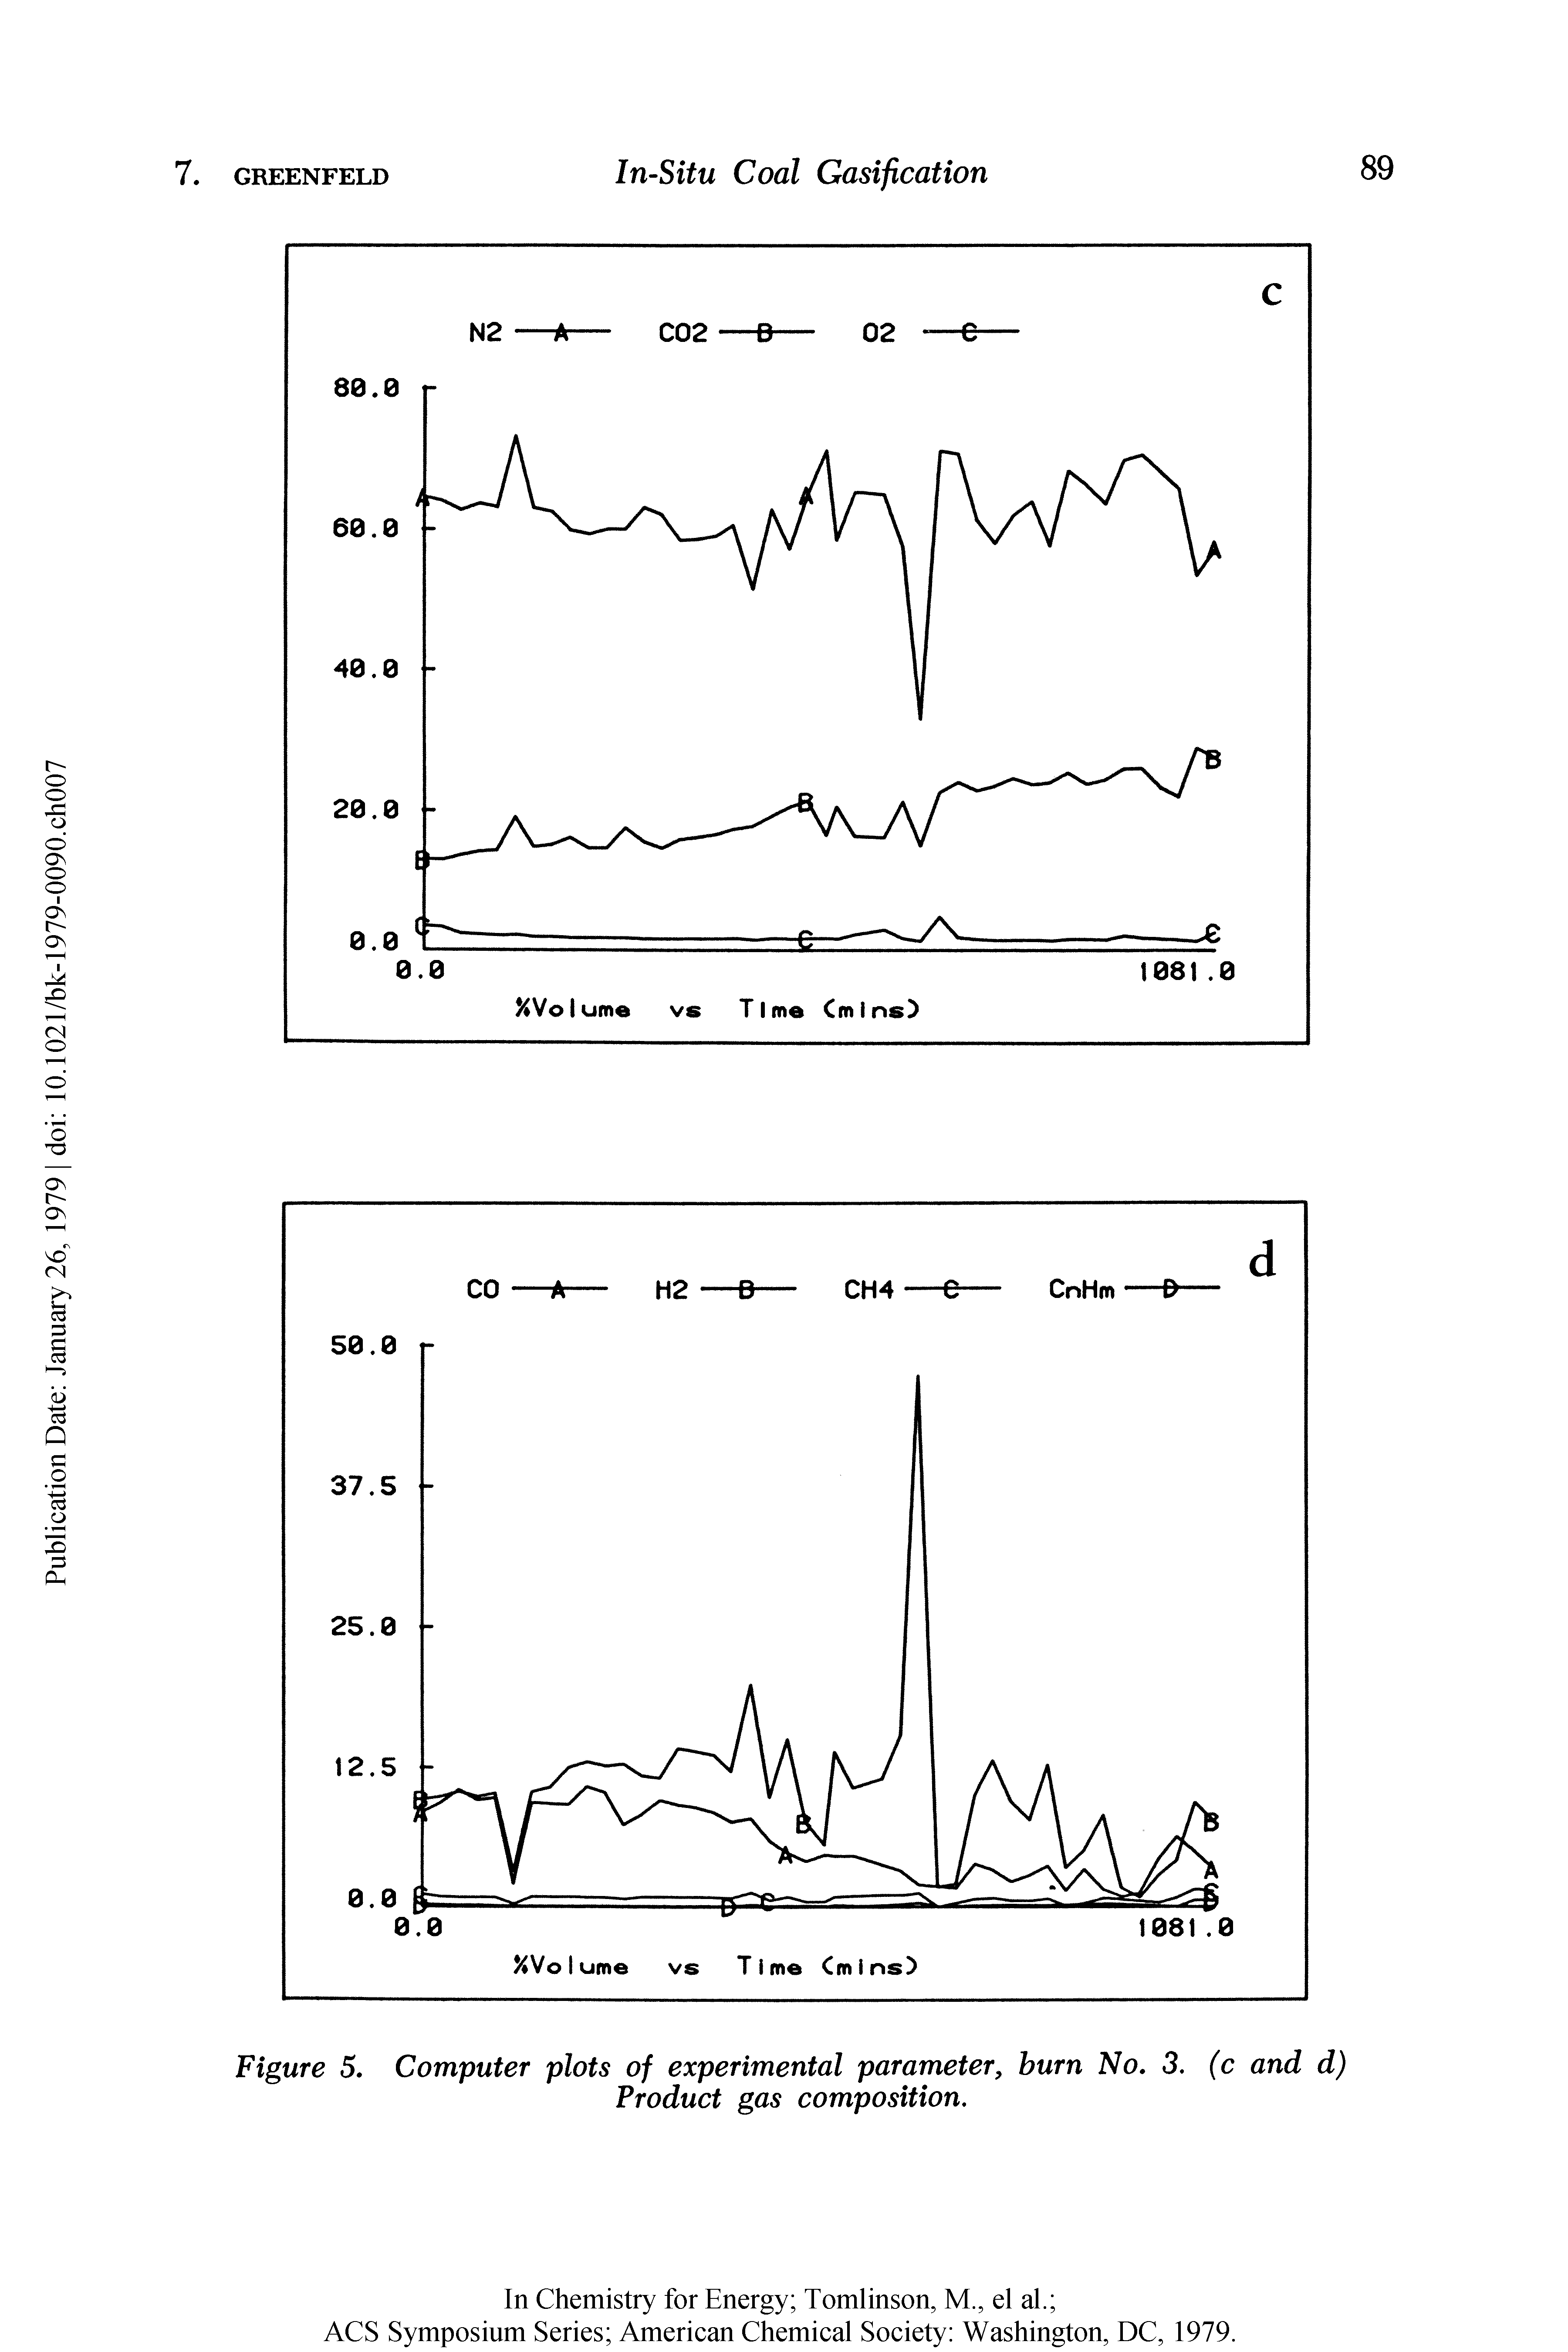 Figure 5. Computer plots of experimental parameter, burn No. 3, (c and d) Product gas composition.